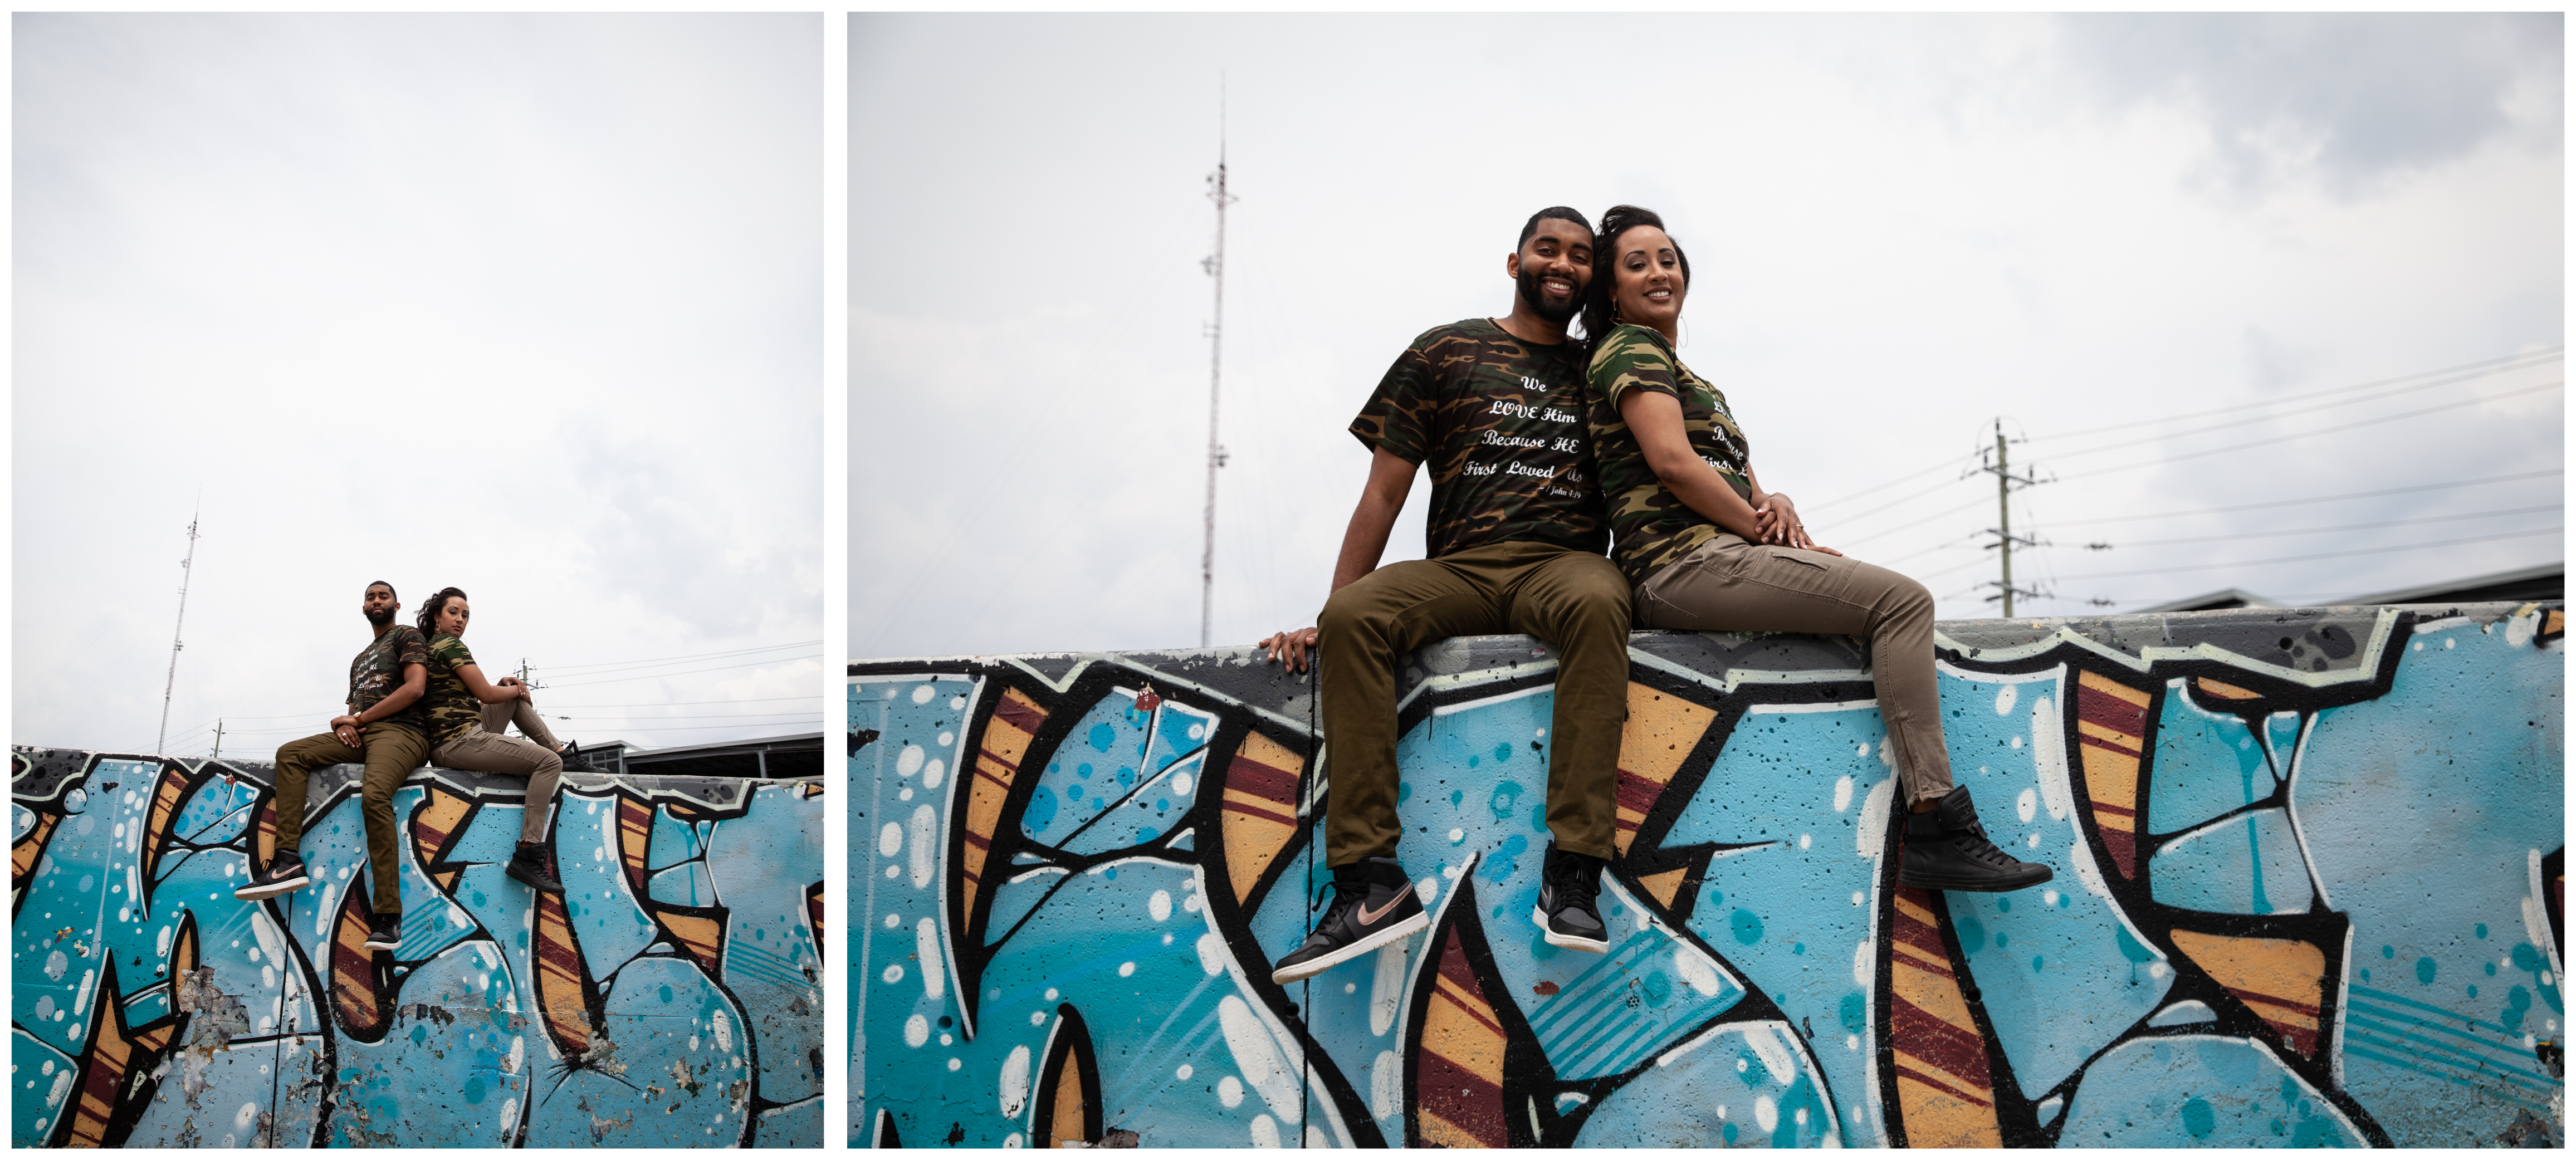 Engagement session at a graffiti wall in Whitby